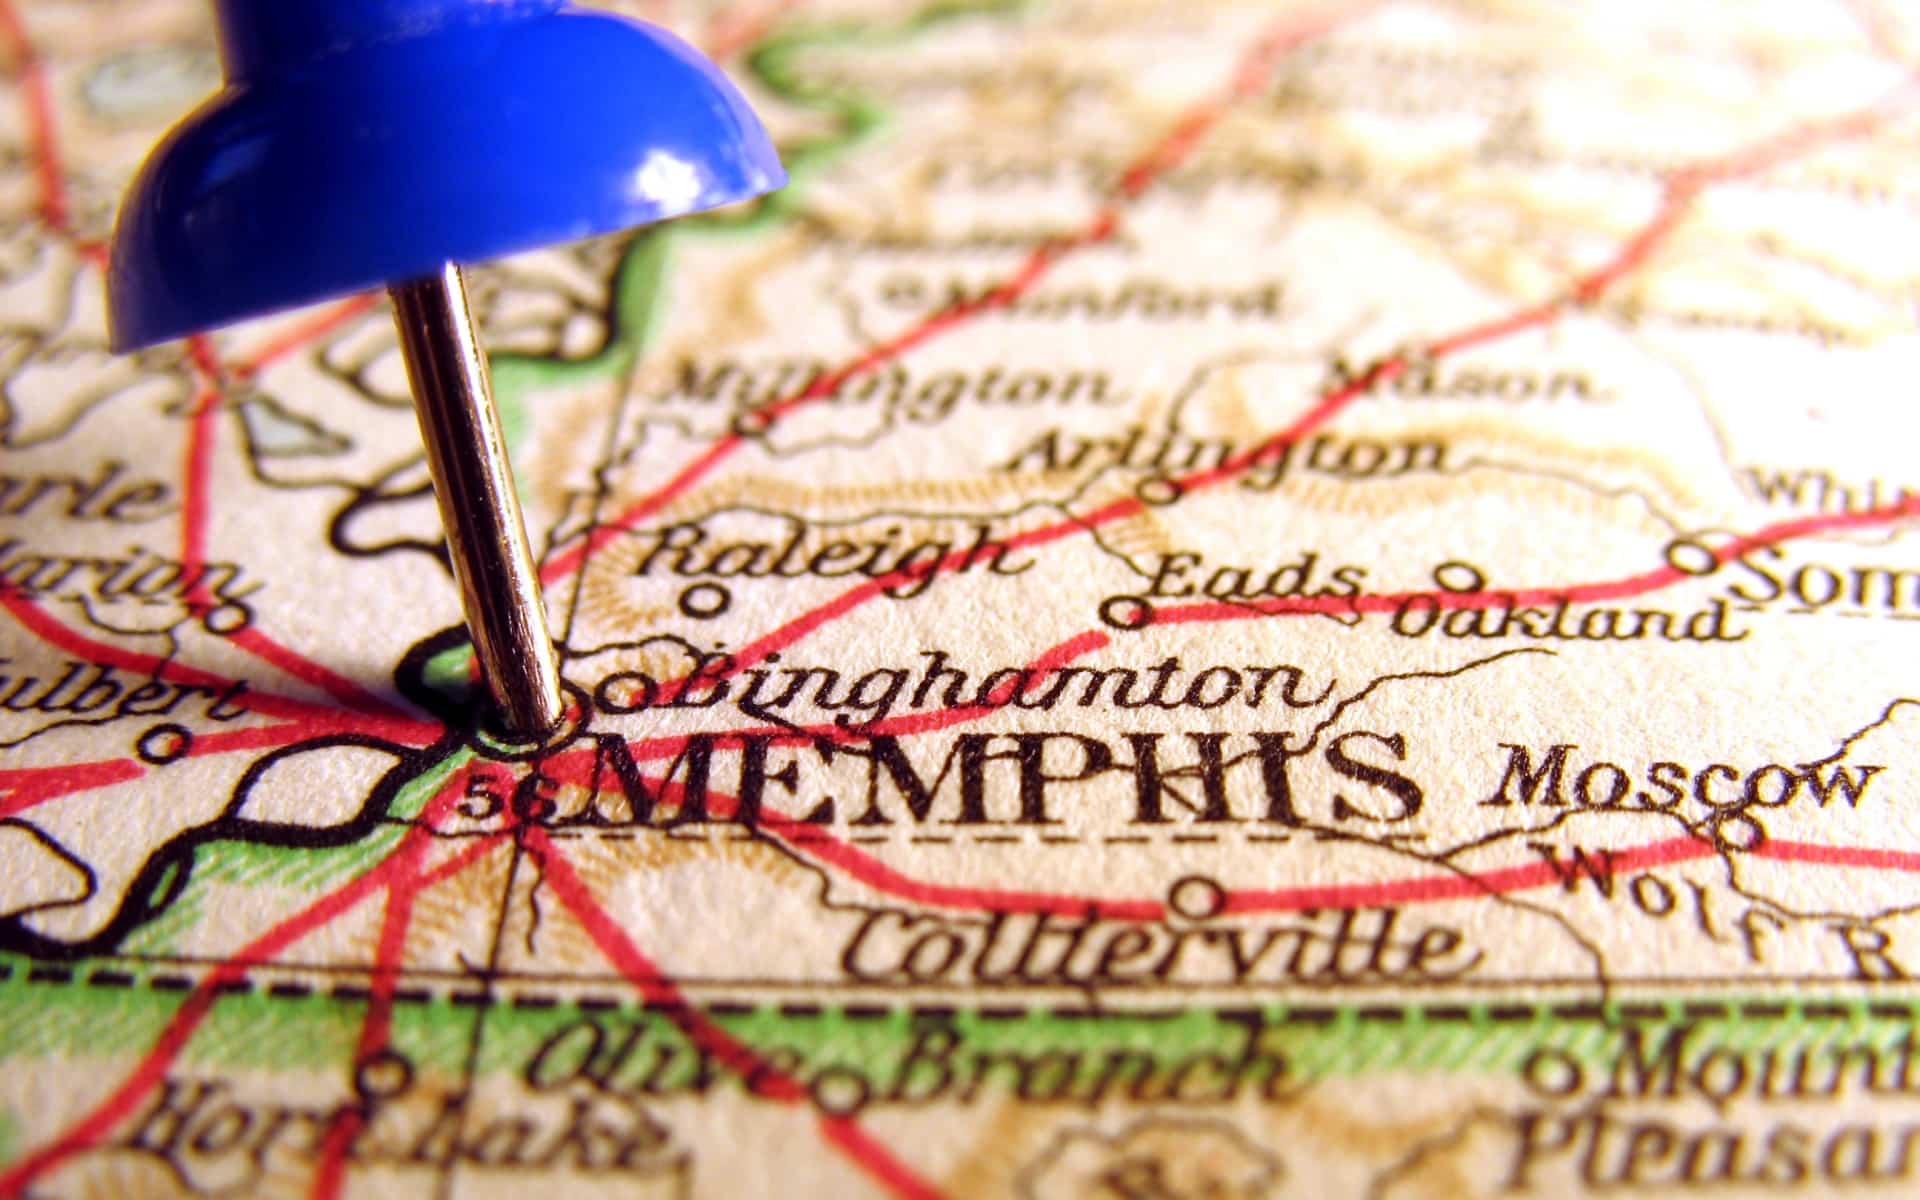 History facts about Memphis that we bet you didn’t know